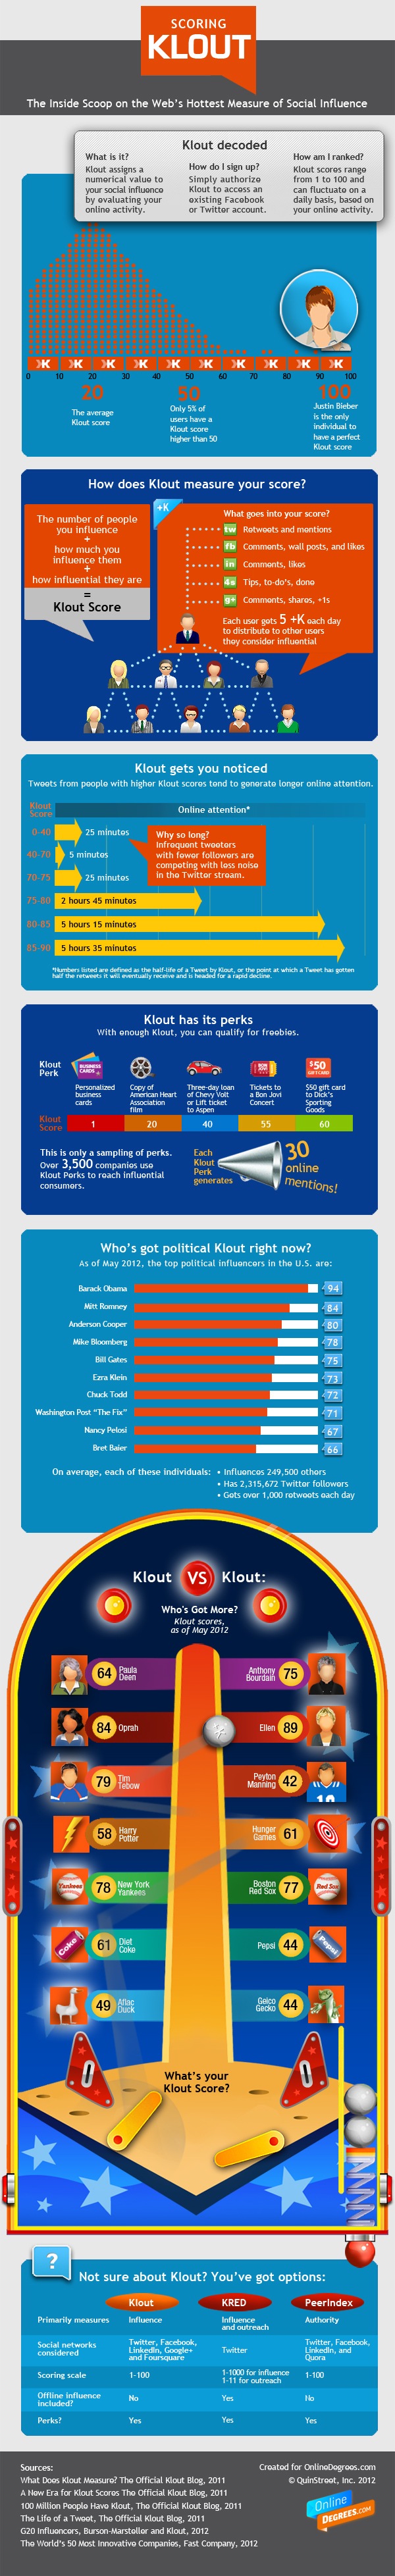 Klout infographic